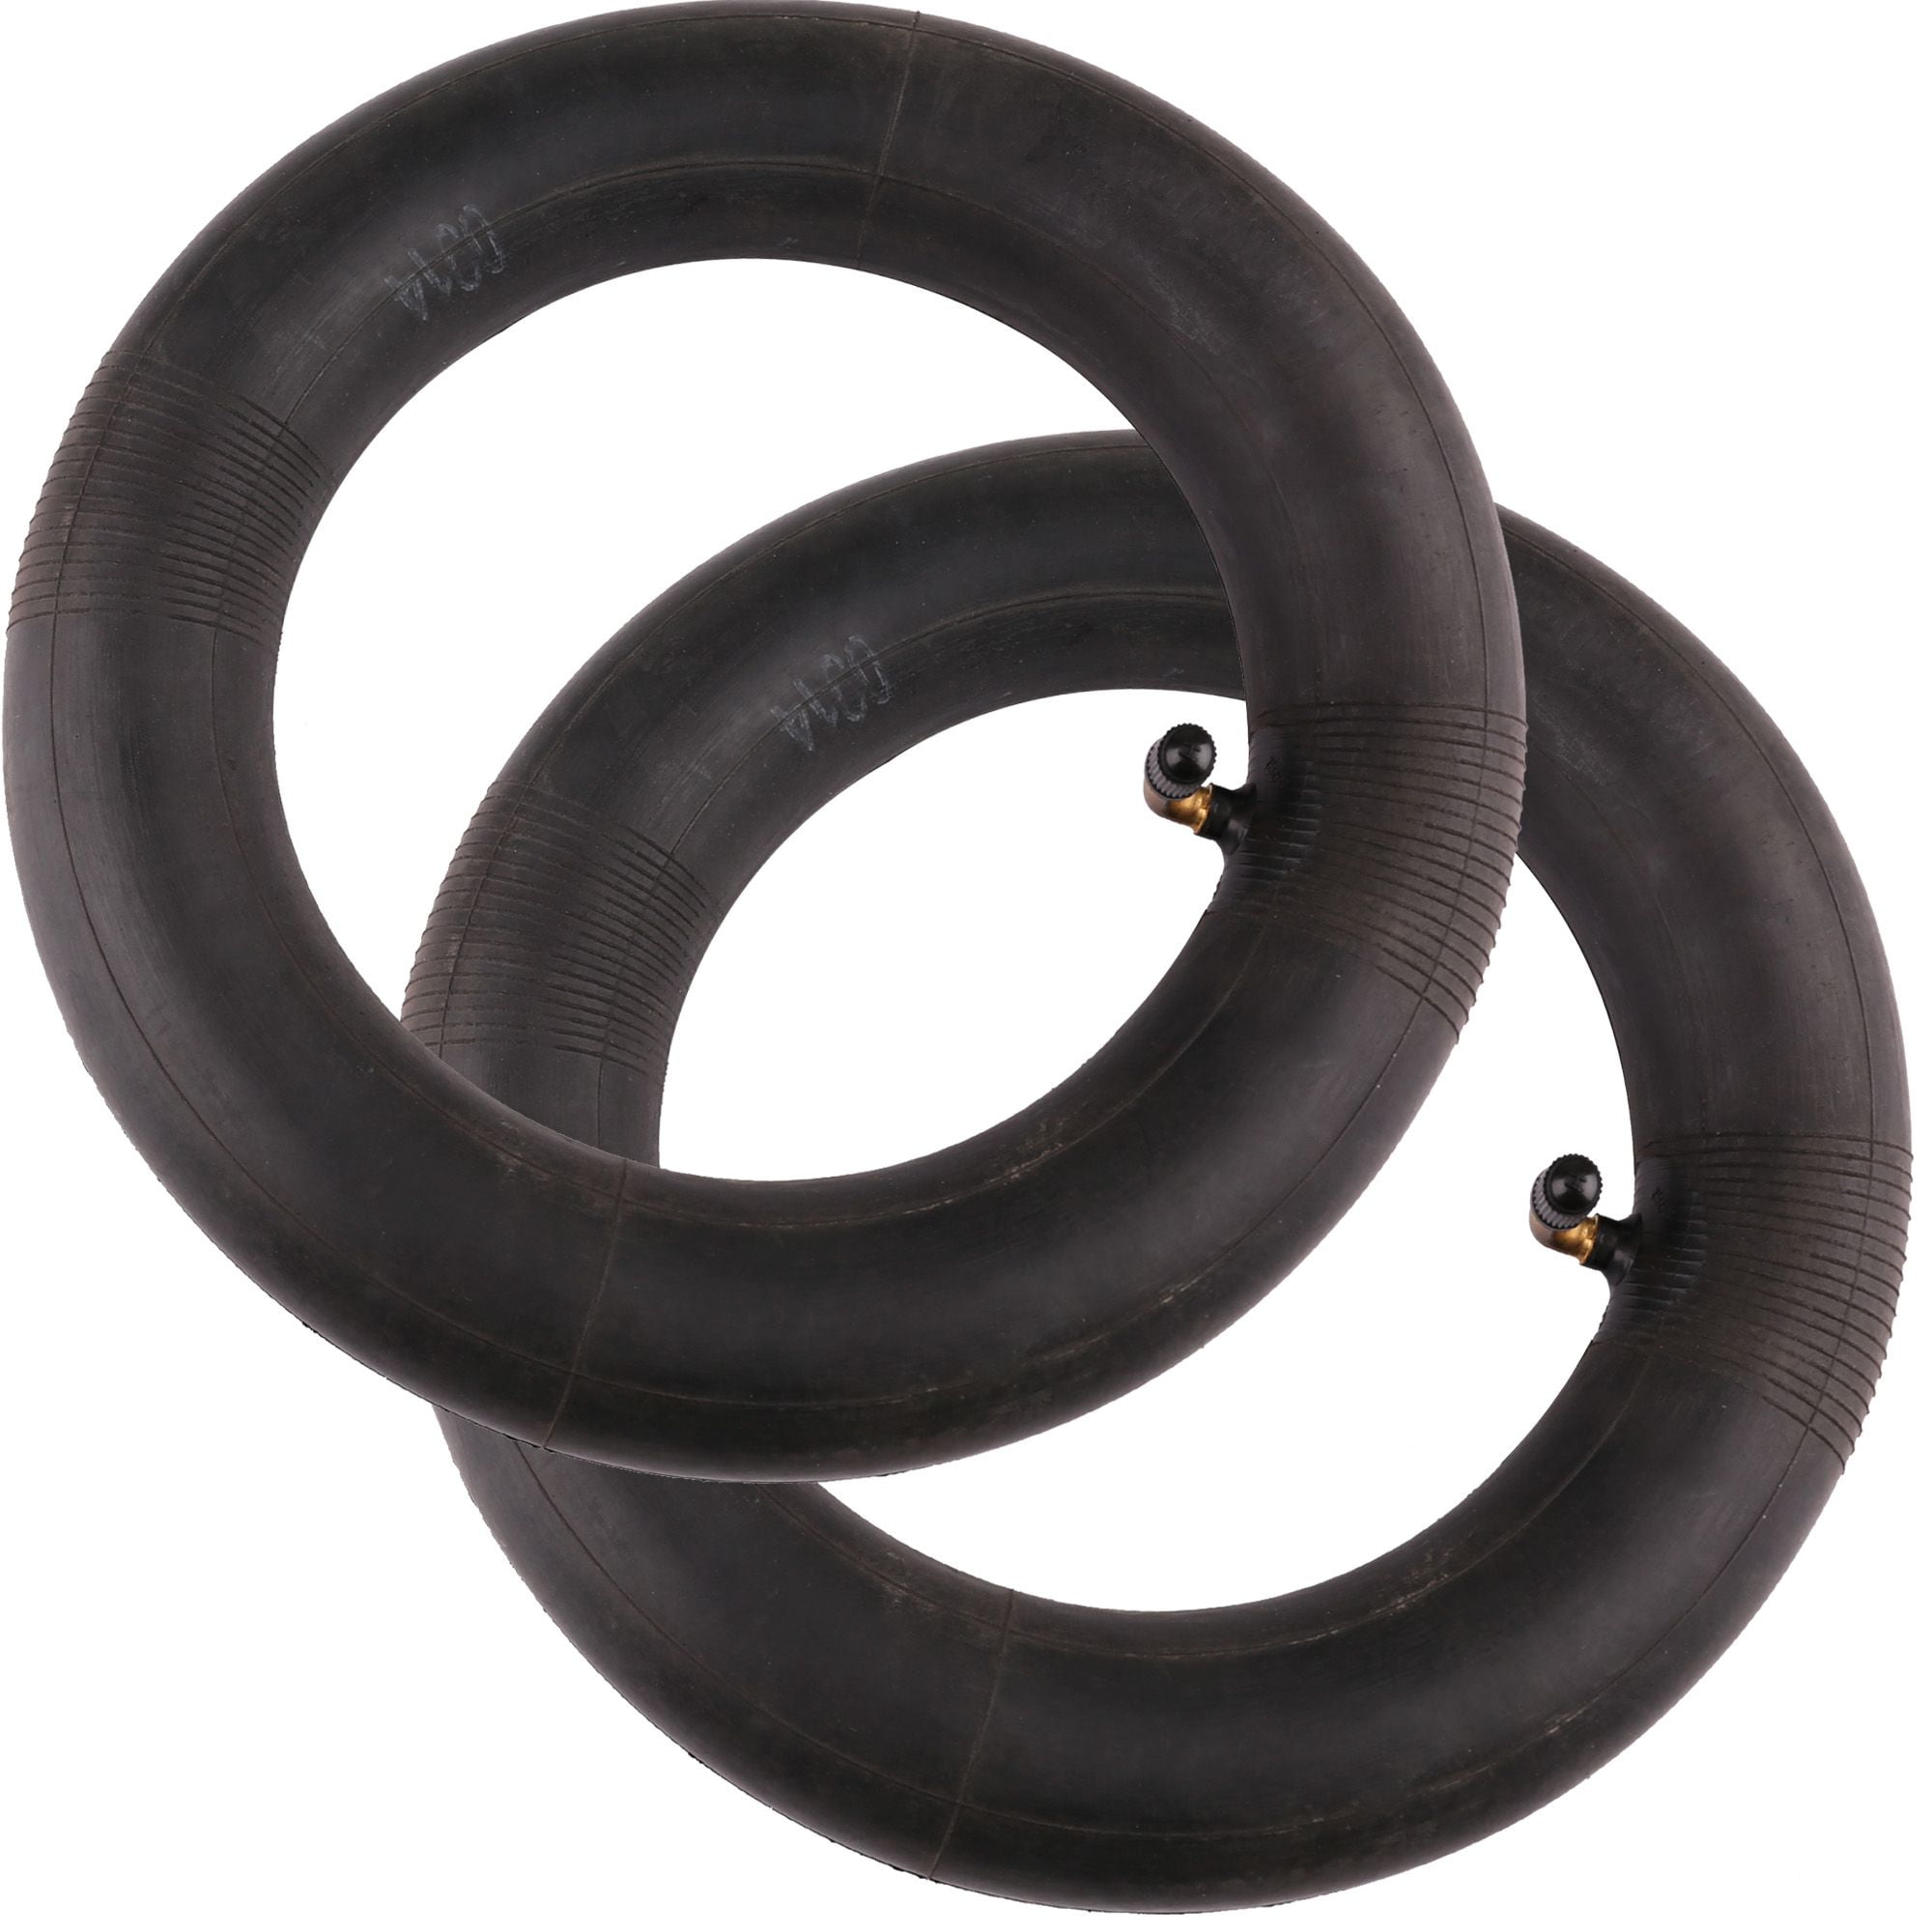 Tire Tube for Schwinn Roadster Trike Tricycle 10x2 for Rear Wheels Bent Valve 